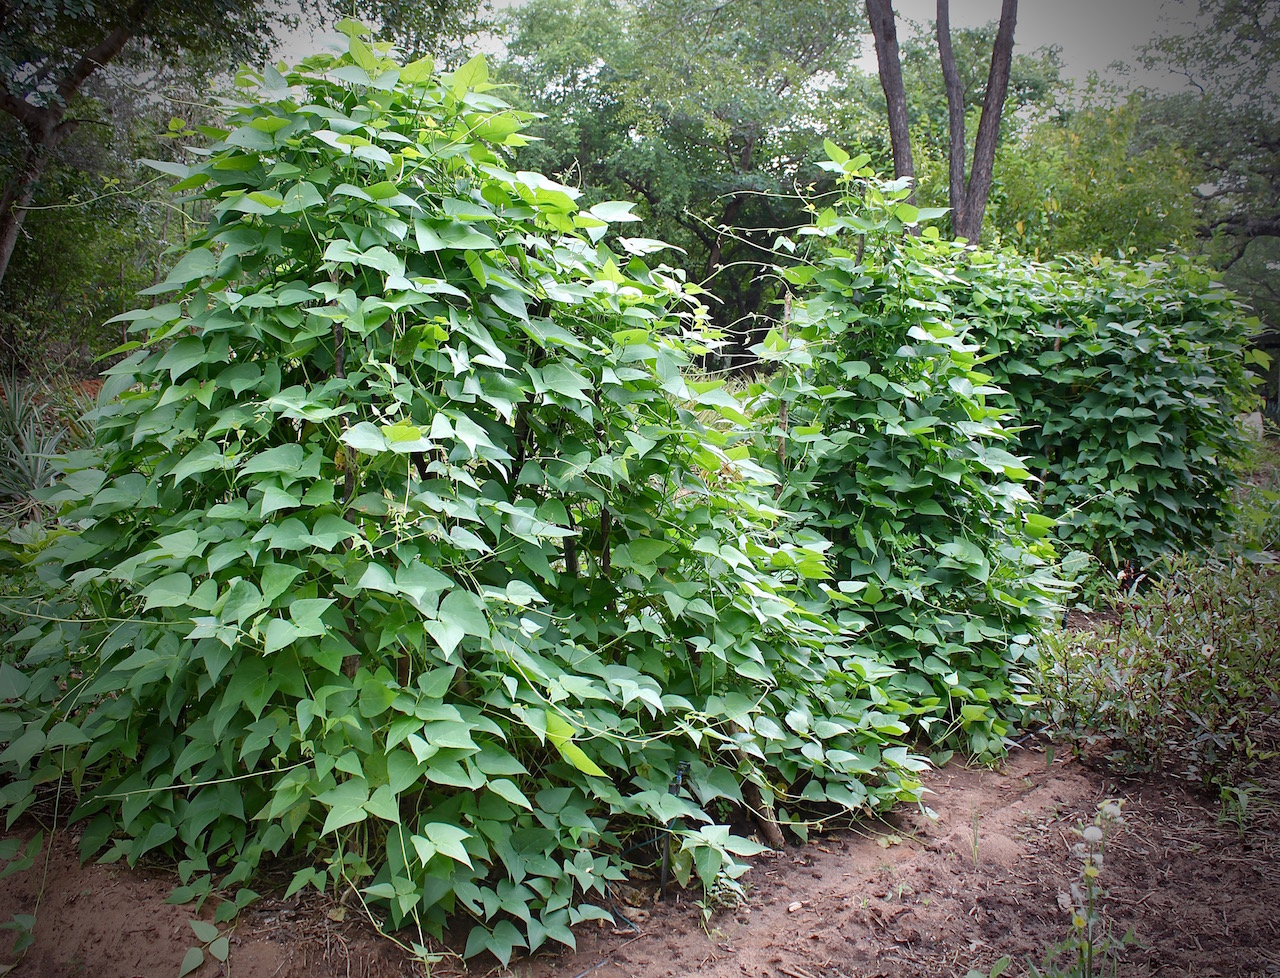 Teepees of lima beans in our garden. They produce and die back, produce and die back, throughout the year.